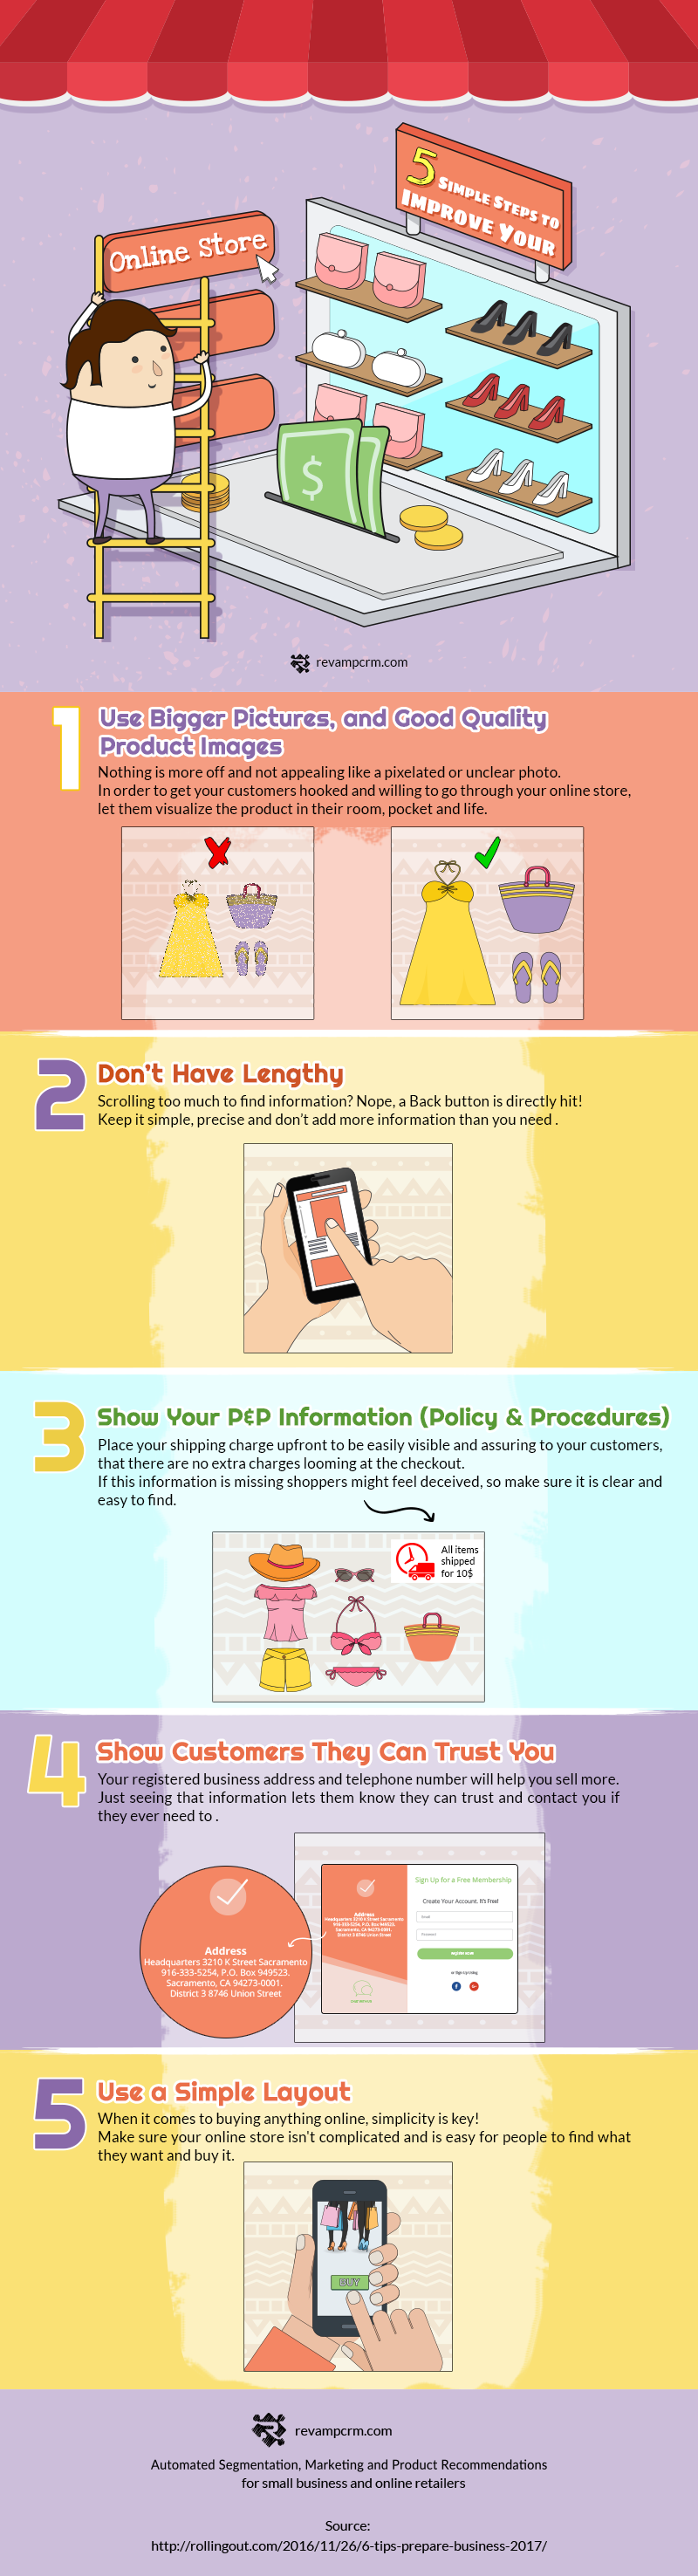 5_Simple_Steps_to_Improve_Your_Online_Store_all_points